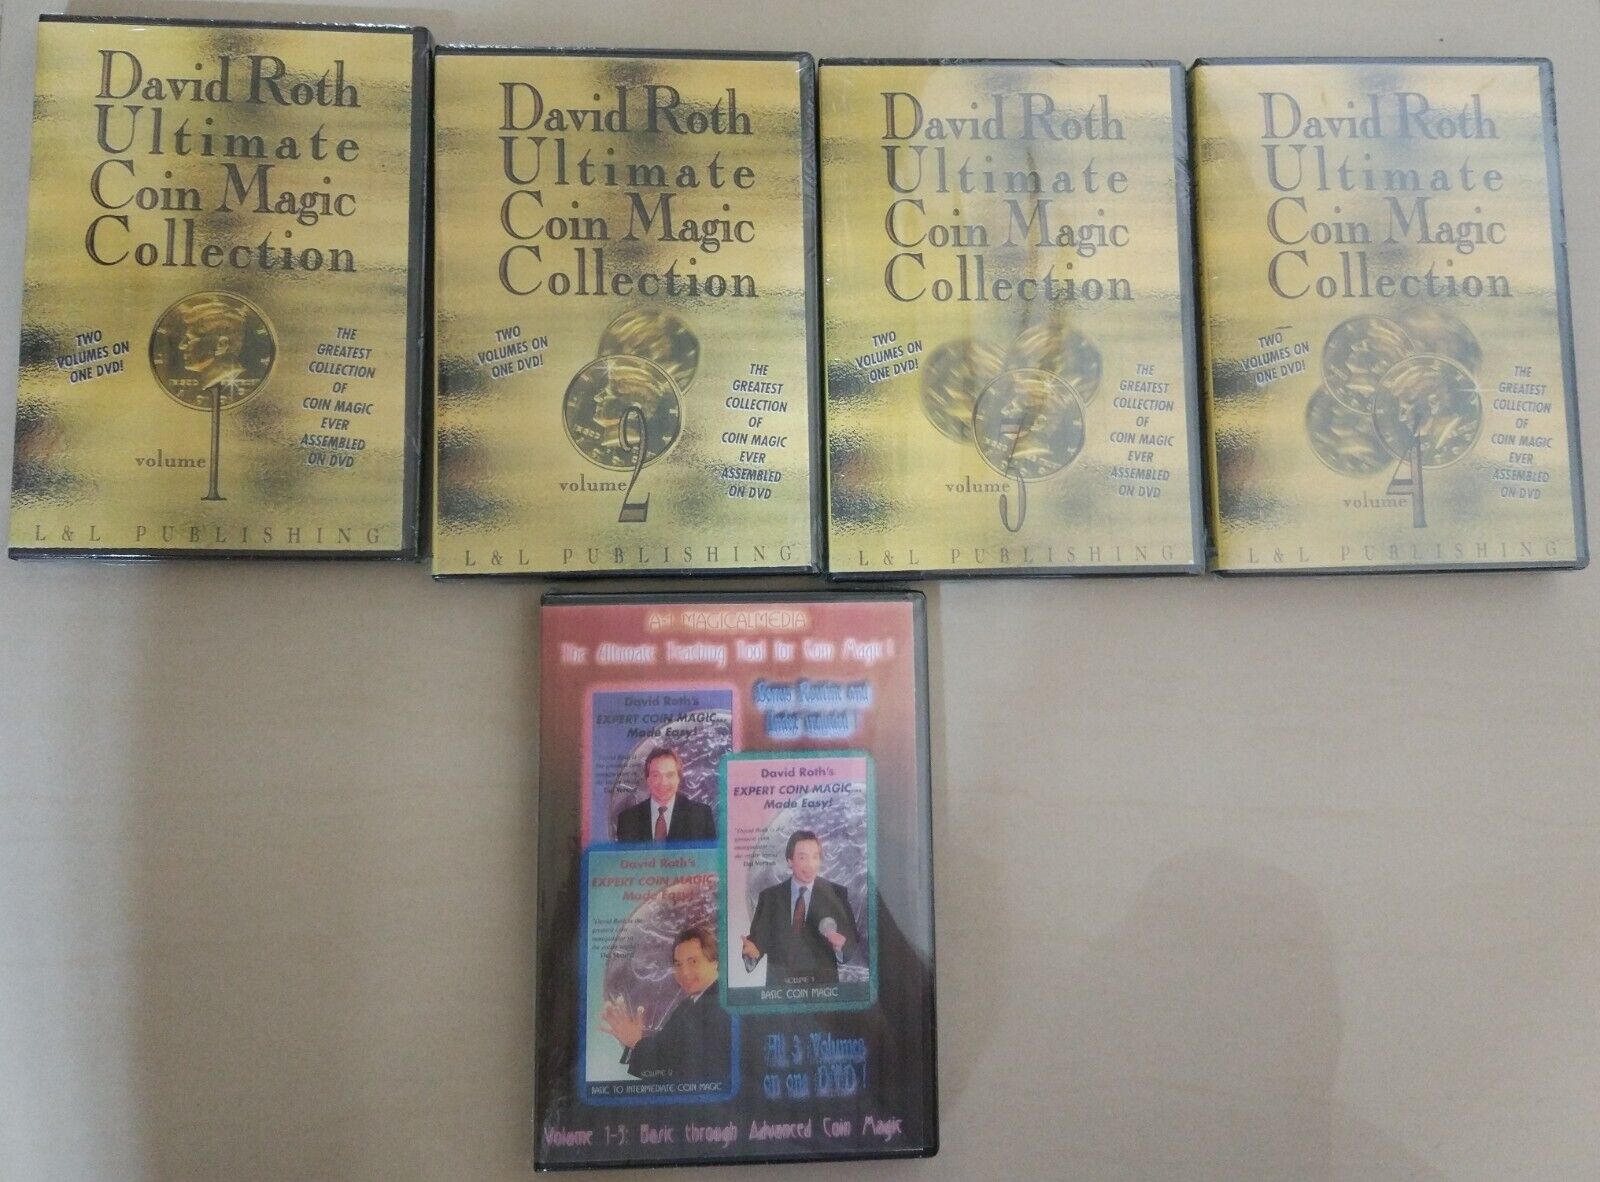 Original Sealed - Coin Magic David Roth 7 Volume 5 DVD Ultimate Coin Collection